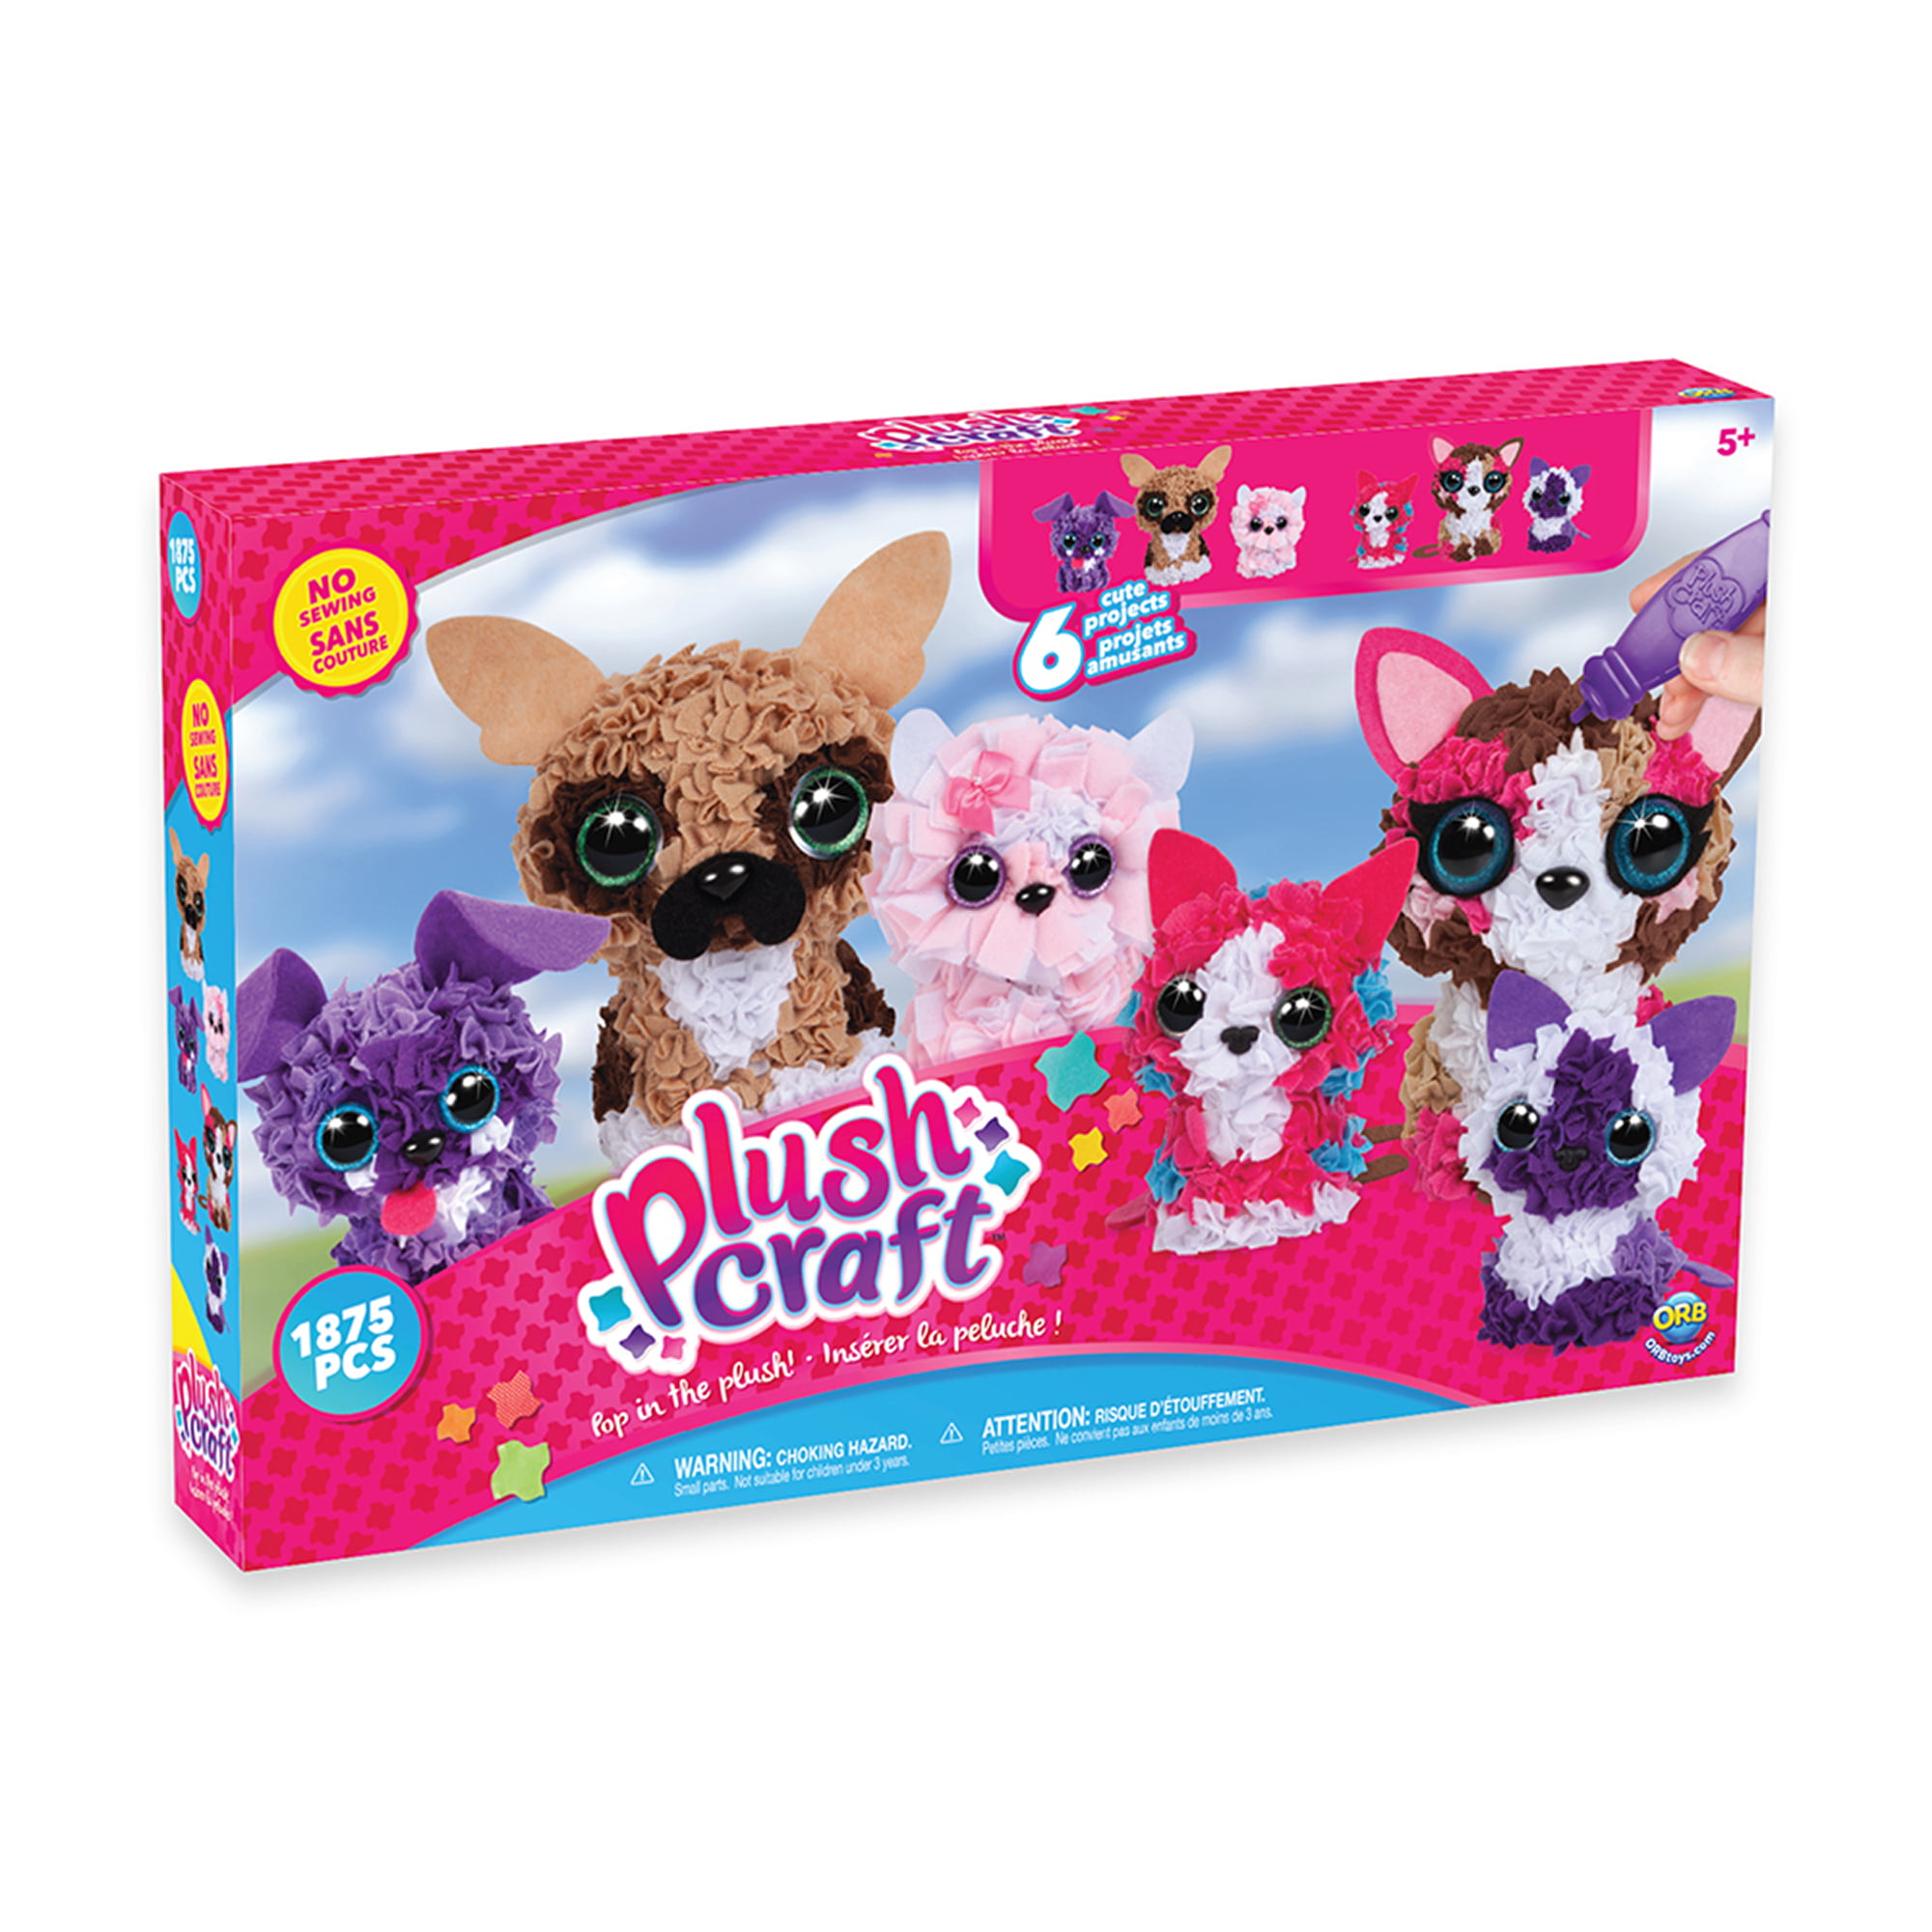 Plush Craft Fabric Fun Puppy Pack from ORB Factory 